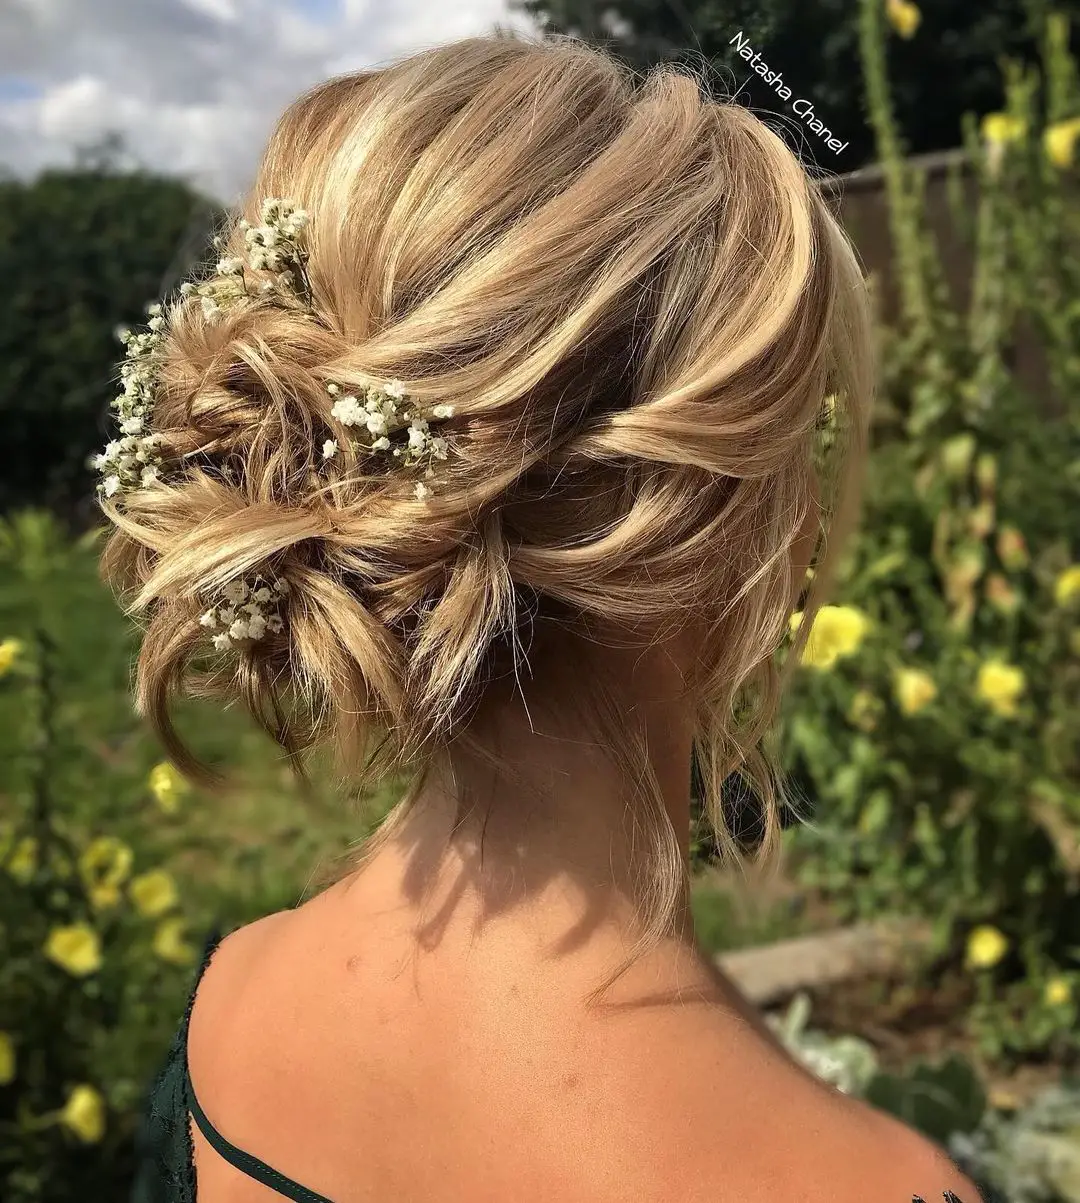 51-homecoming-prom-hairstyles-for-girls-with-short-hair Bohemian Updo